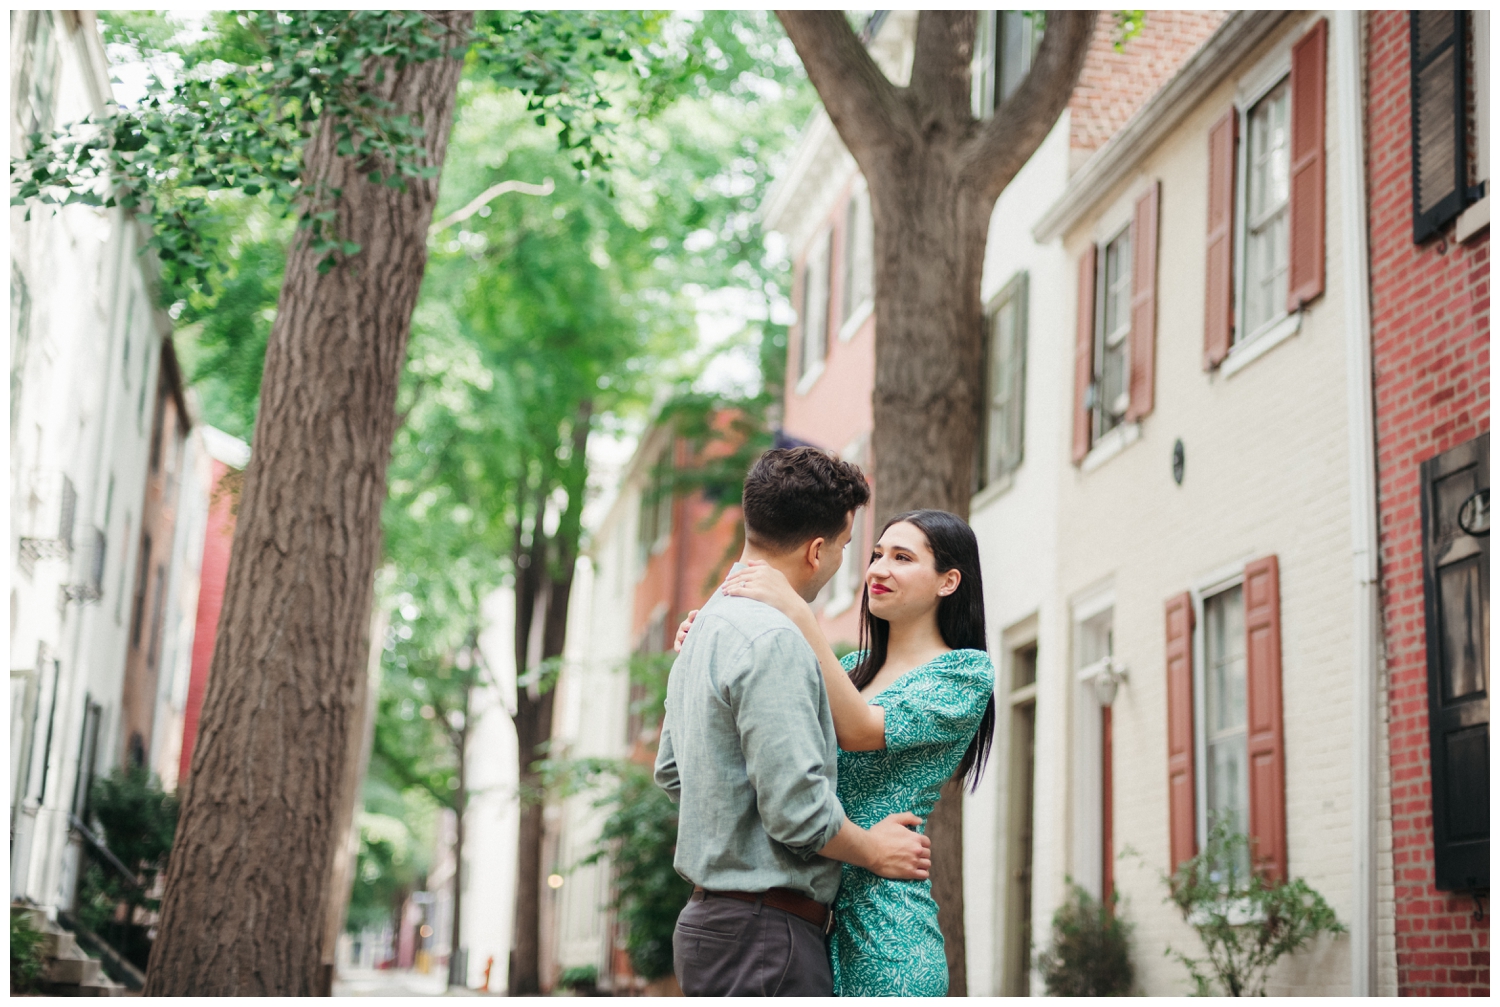 The couple embraces on a tree-lined street